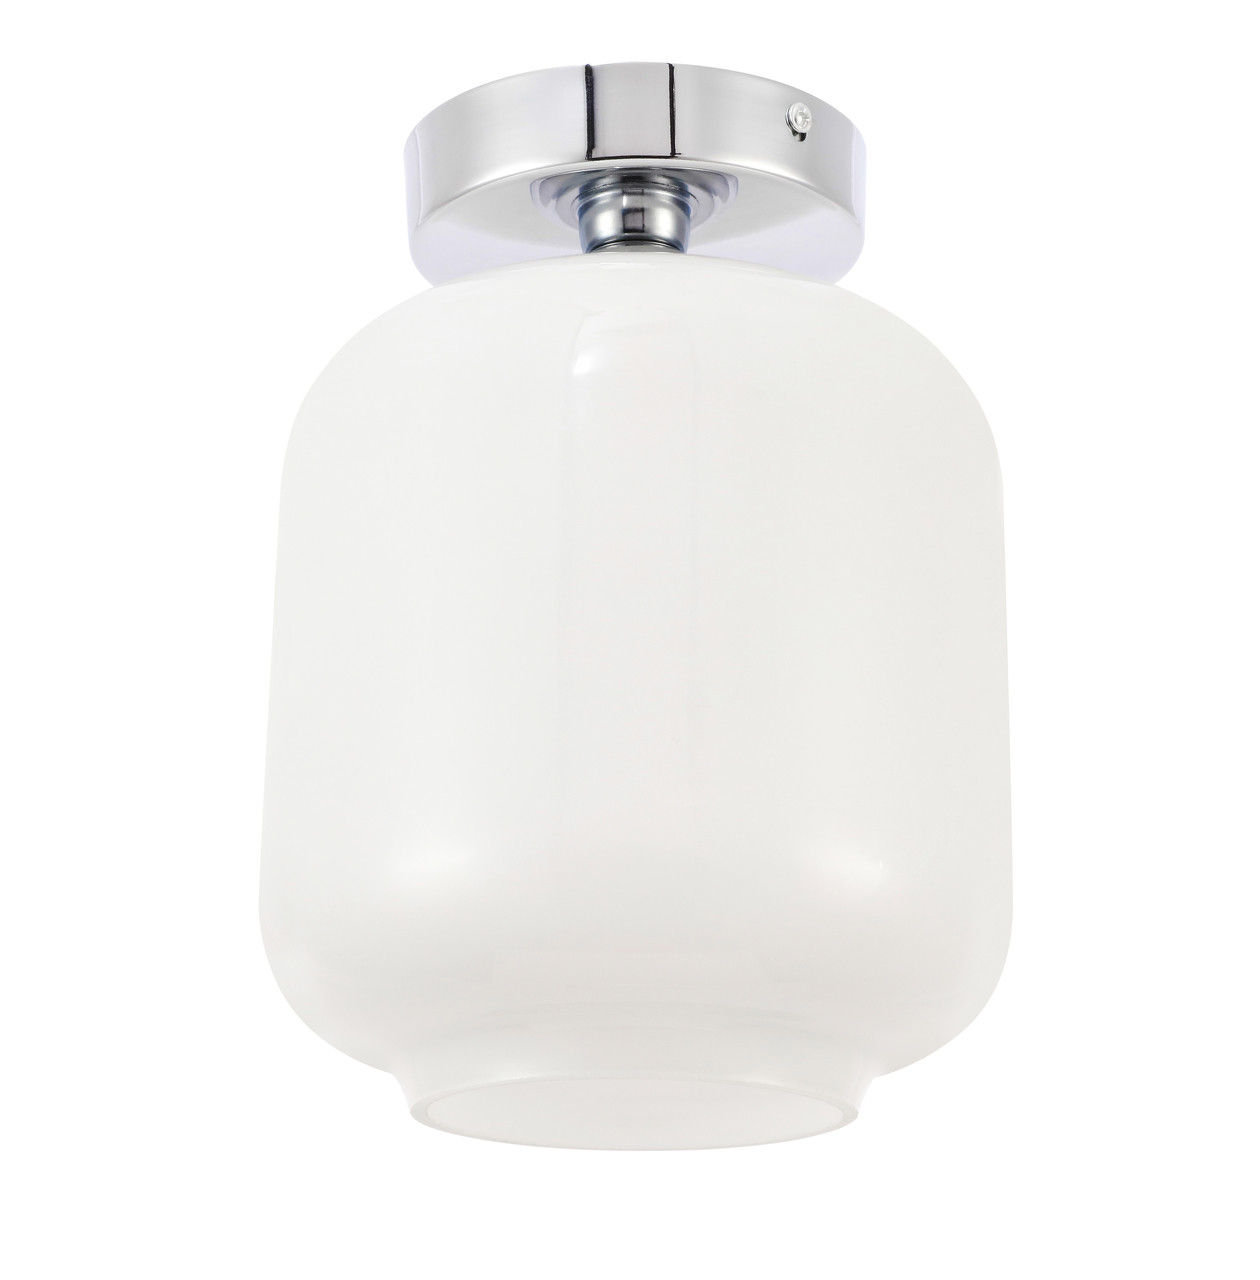 Living District LD2271C Collier 1 light Chrome and Frosted white glass Flush mount